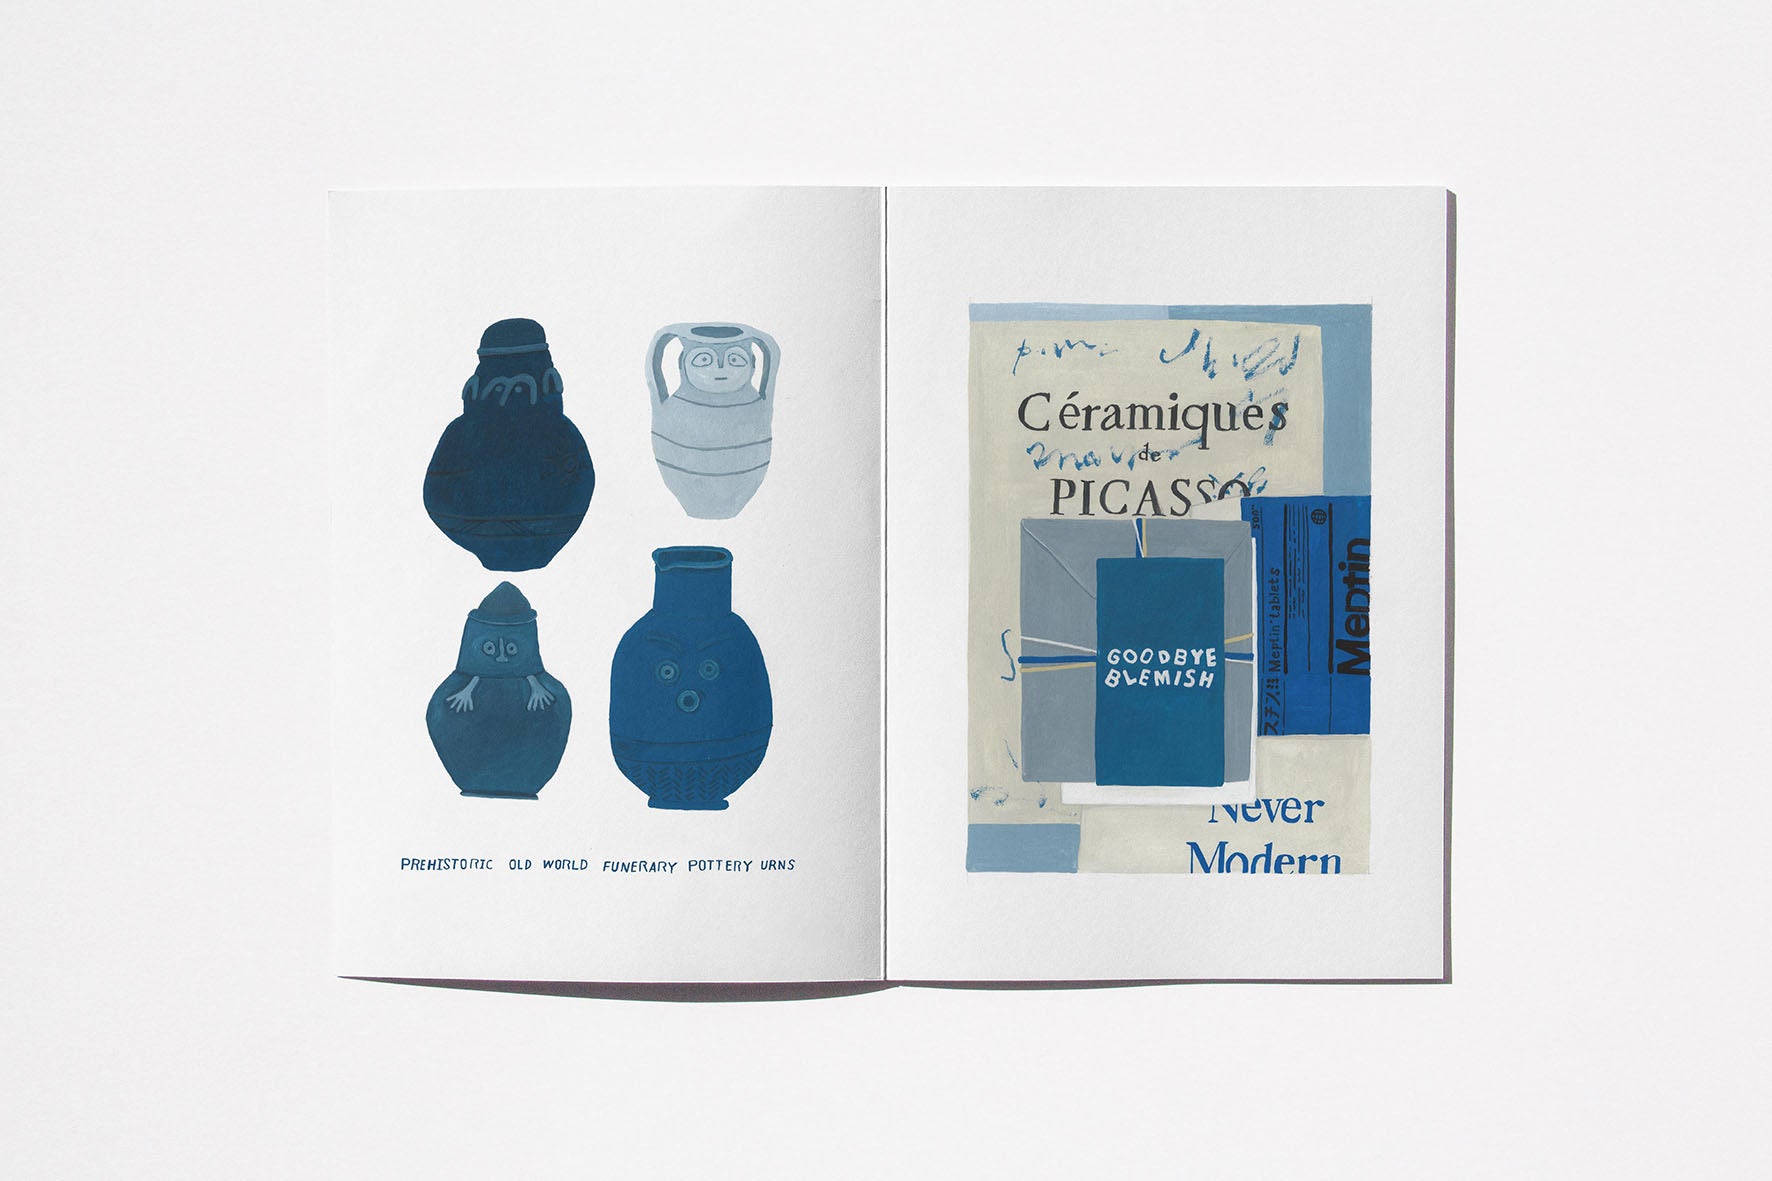 sindroms / Issue #6: Blue Sindrom